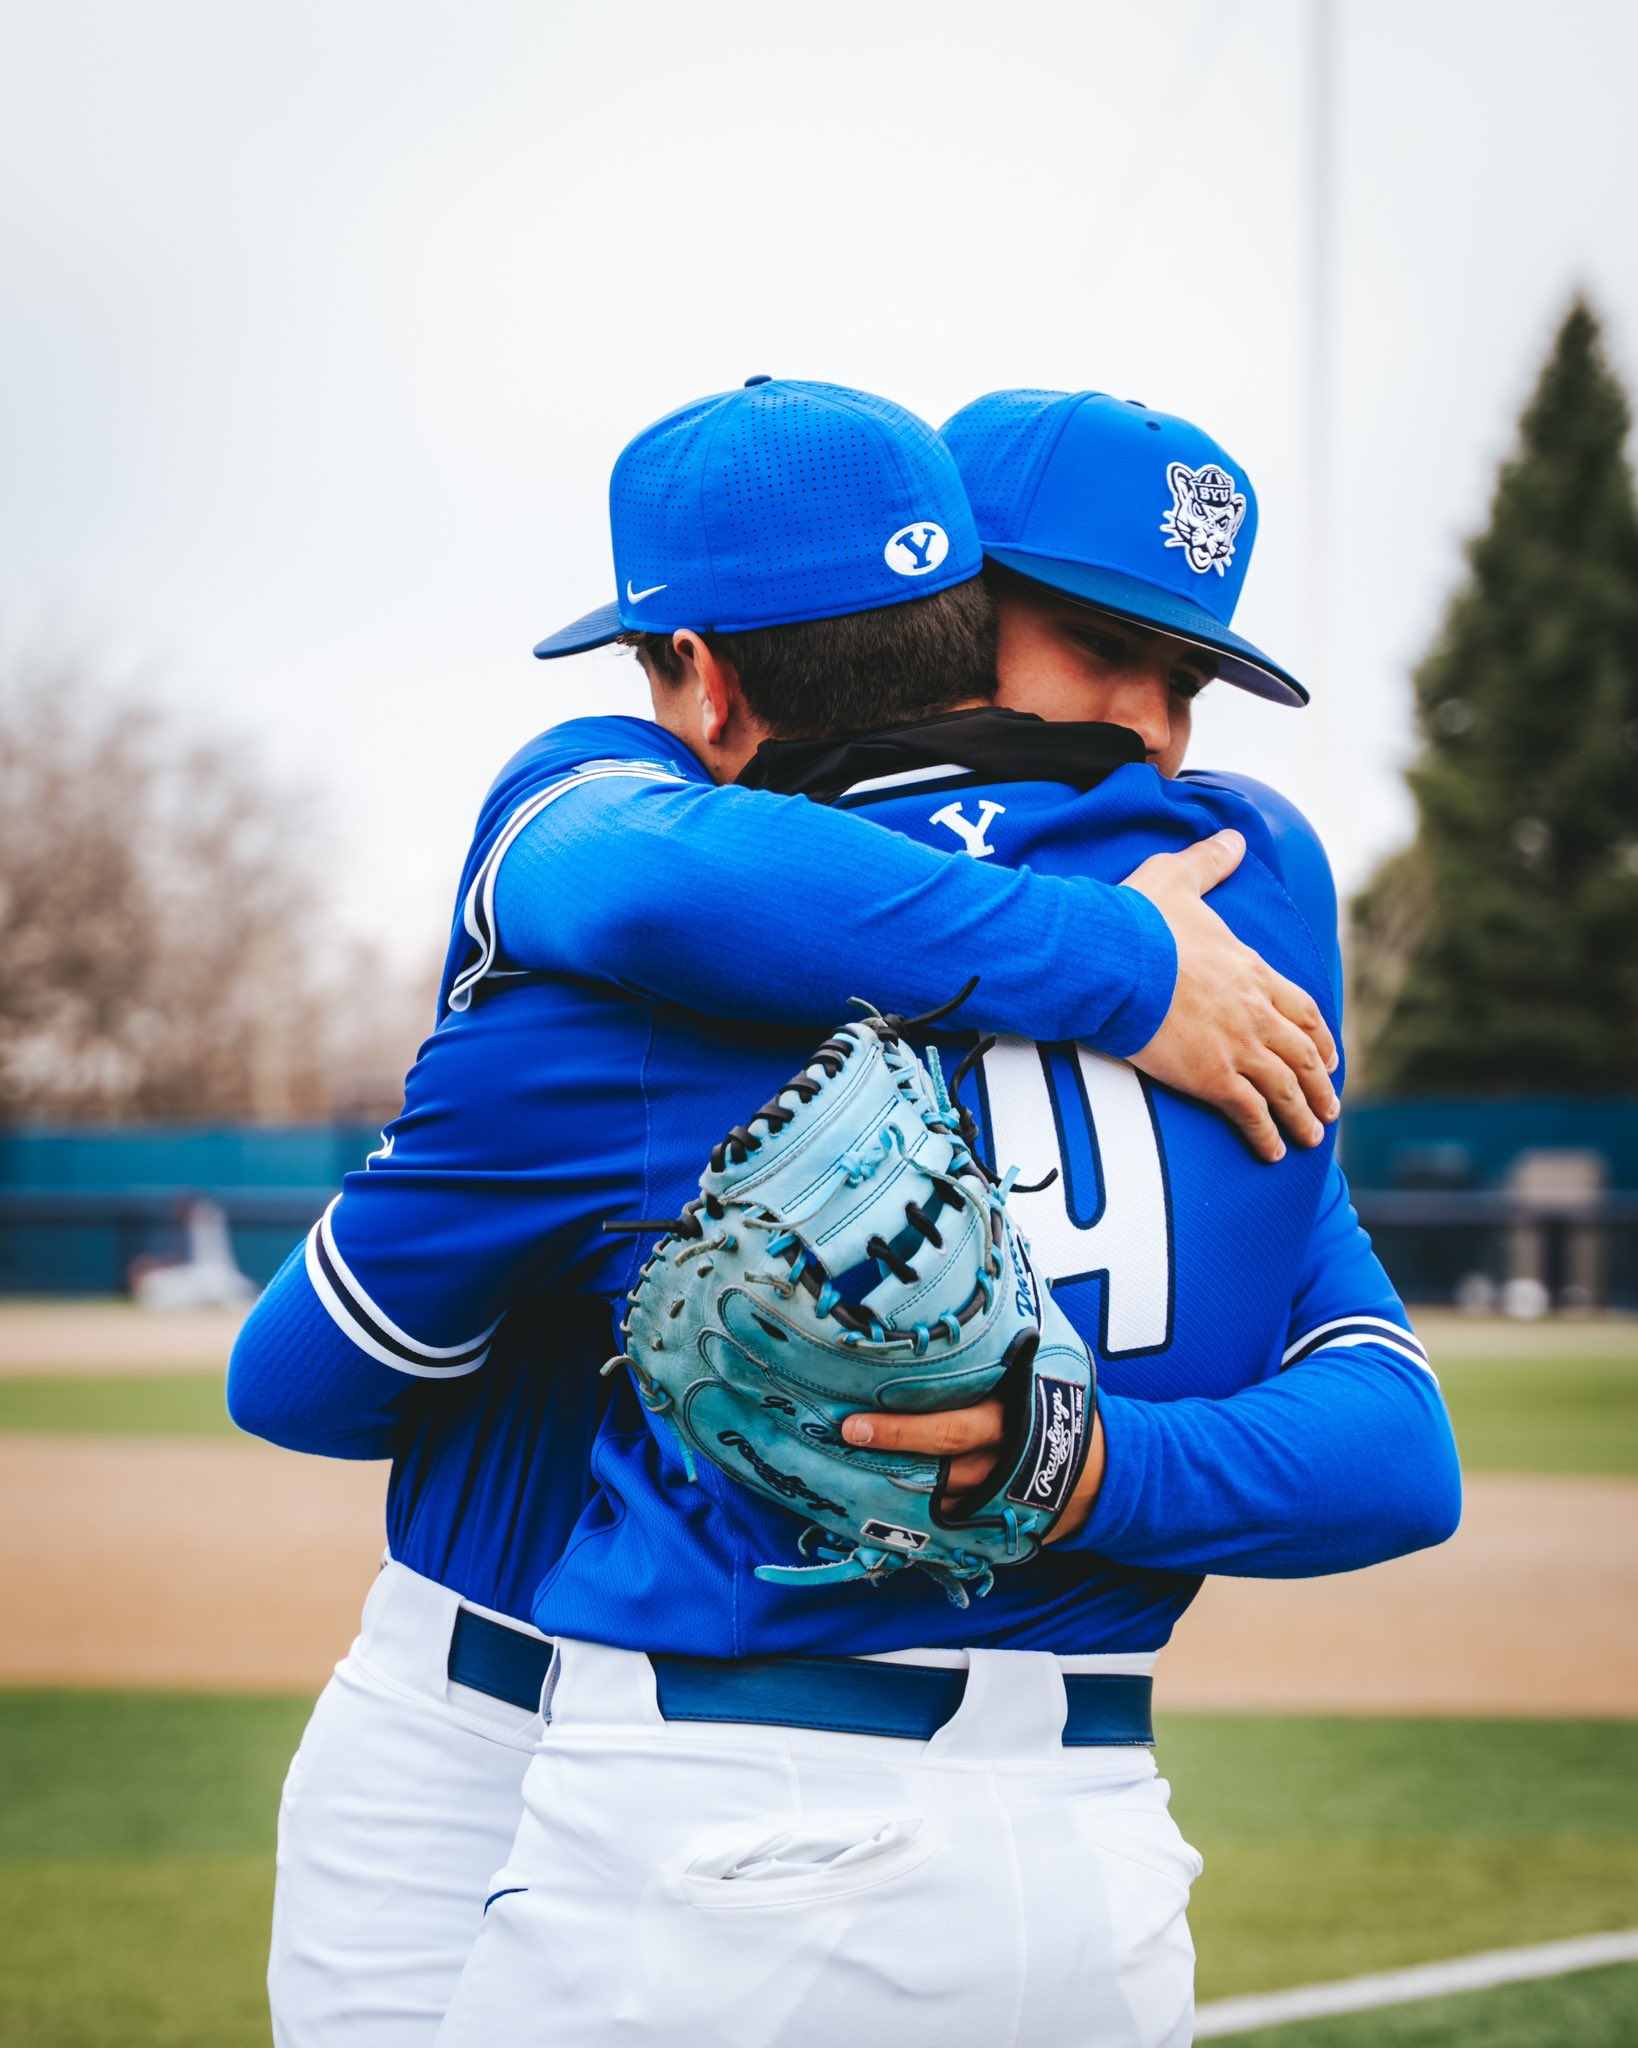 BYU baseball plates 15 runs in exciting win over UVU The Daily Universe